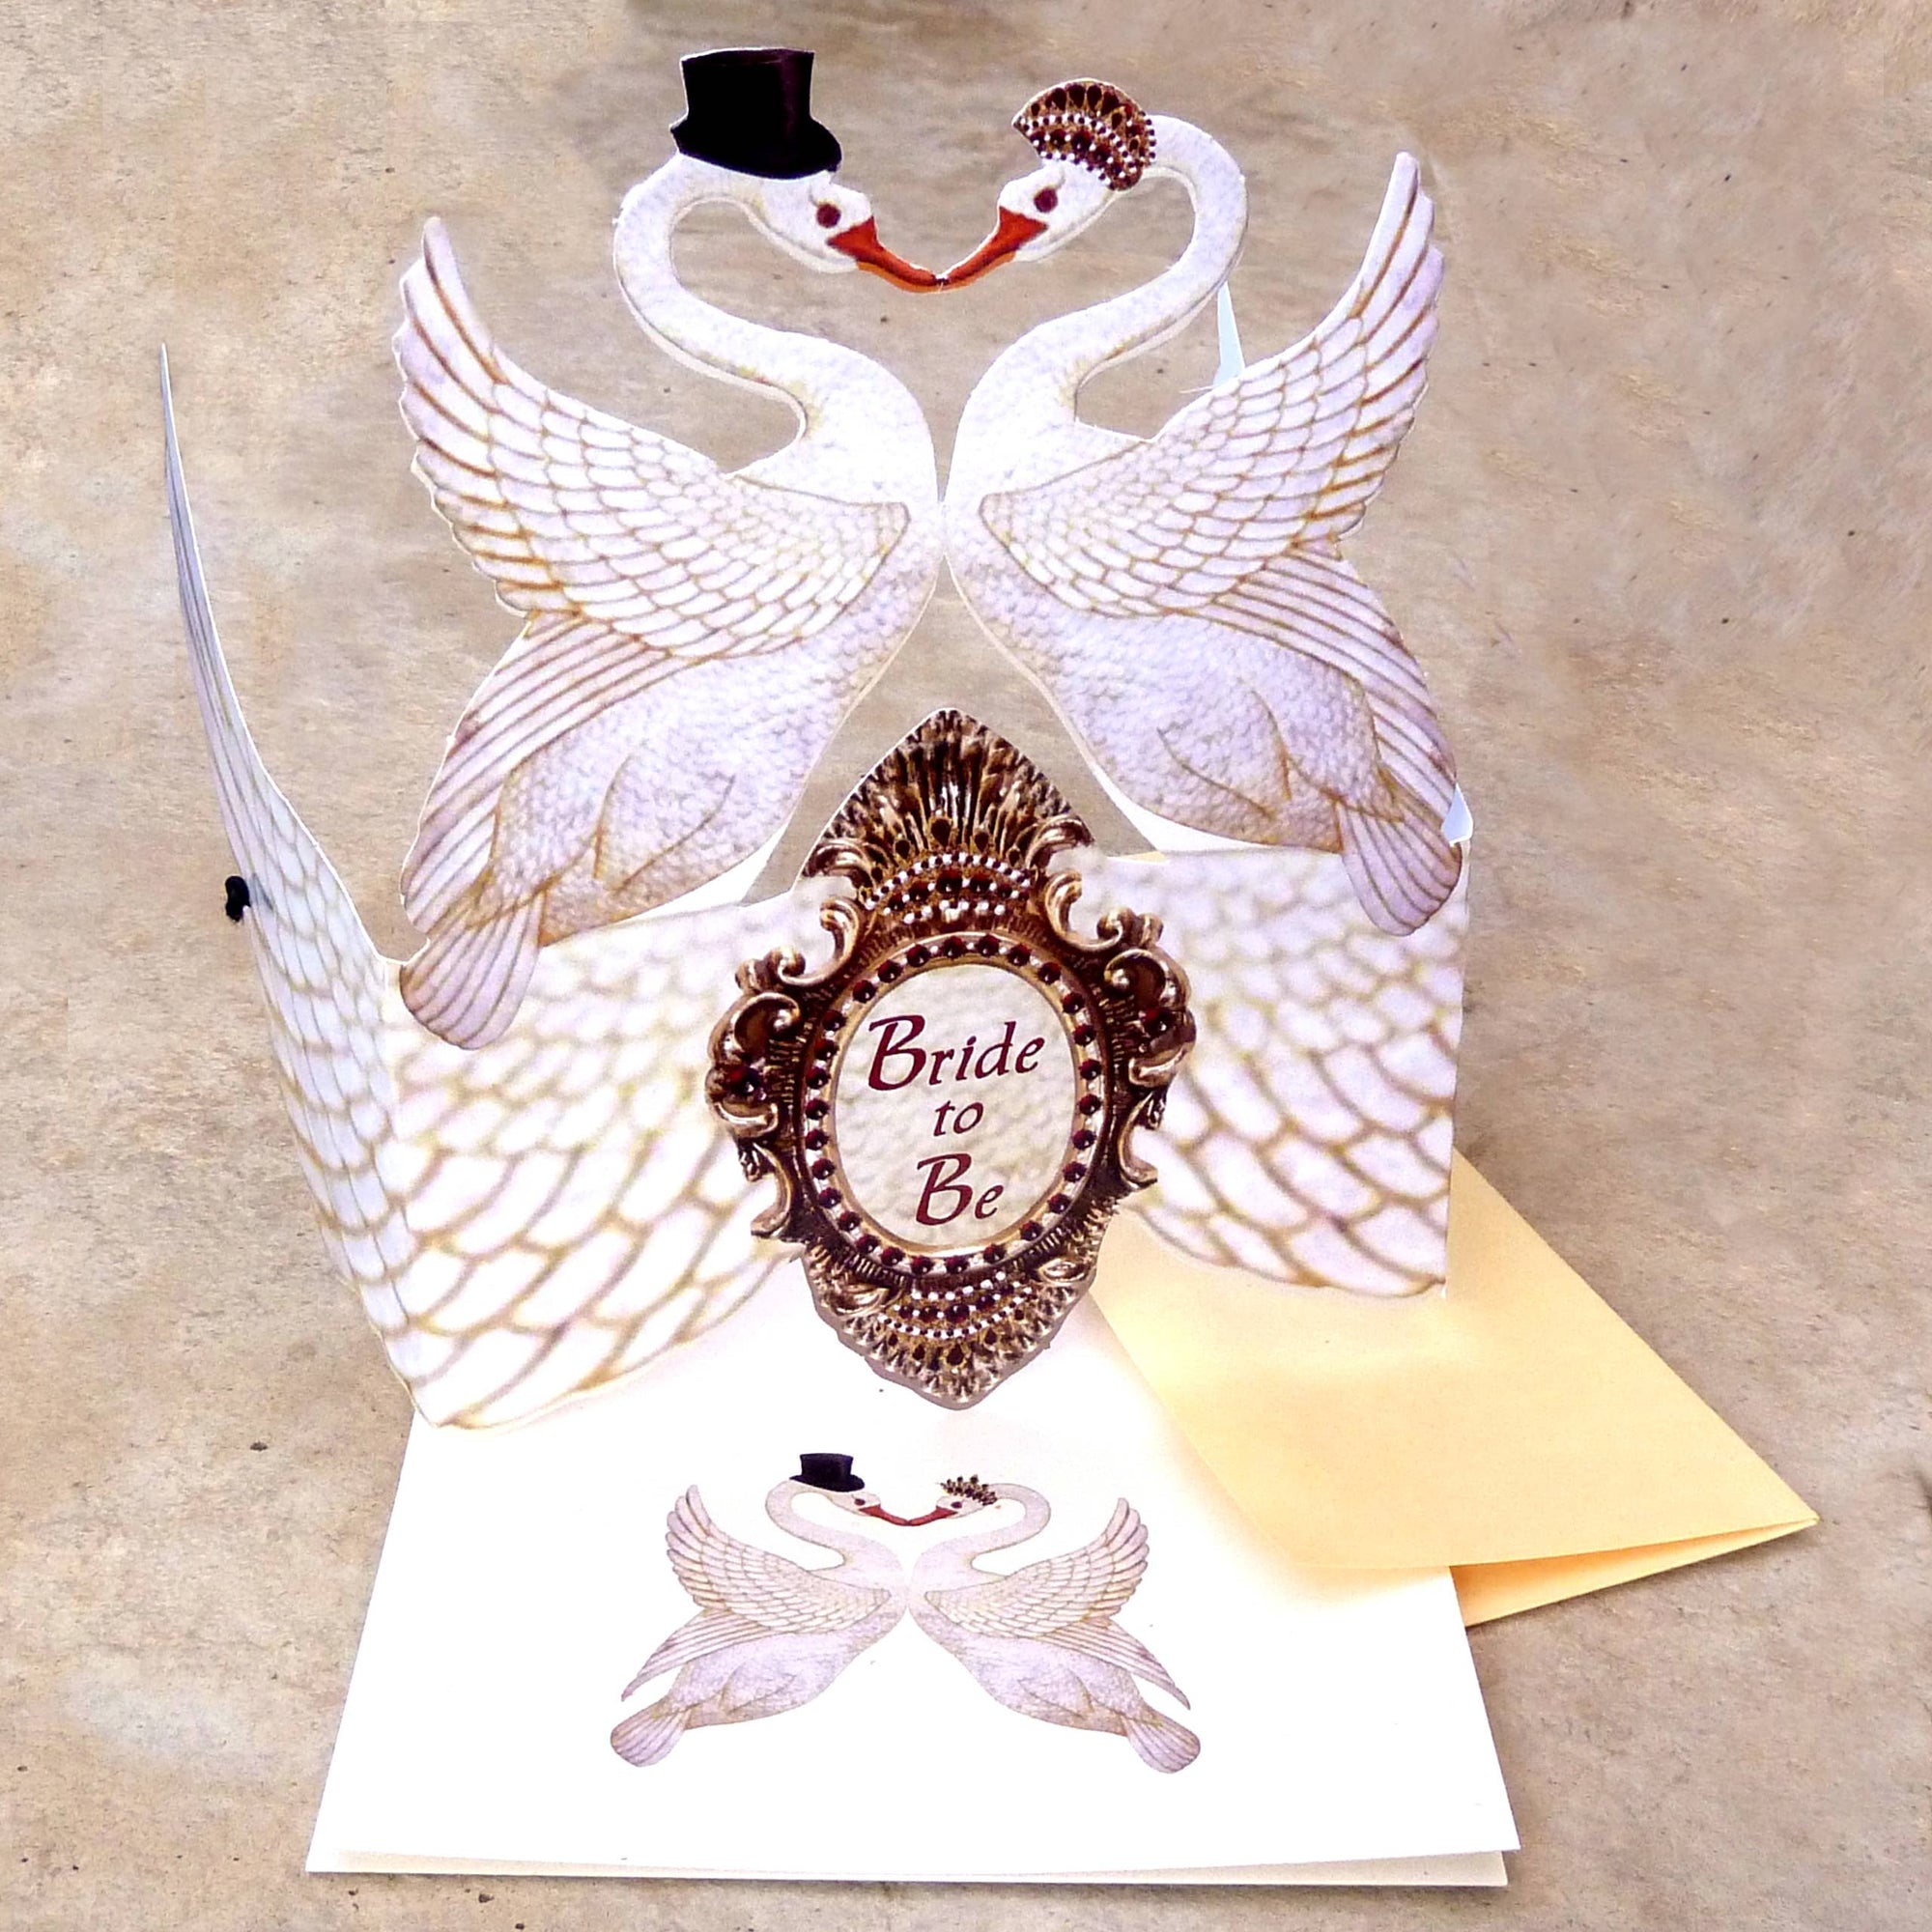 Heart The Moment - Greeting Card with Tiara, Bride to Be, Swans